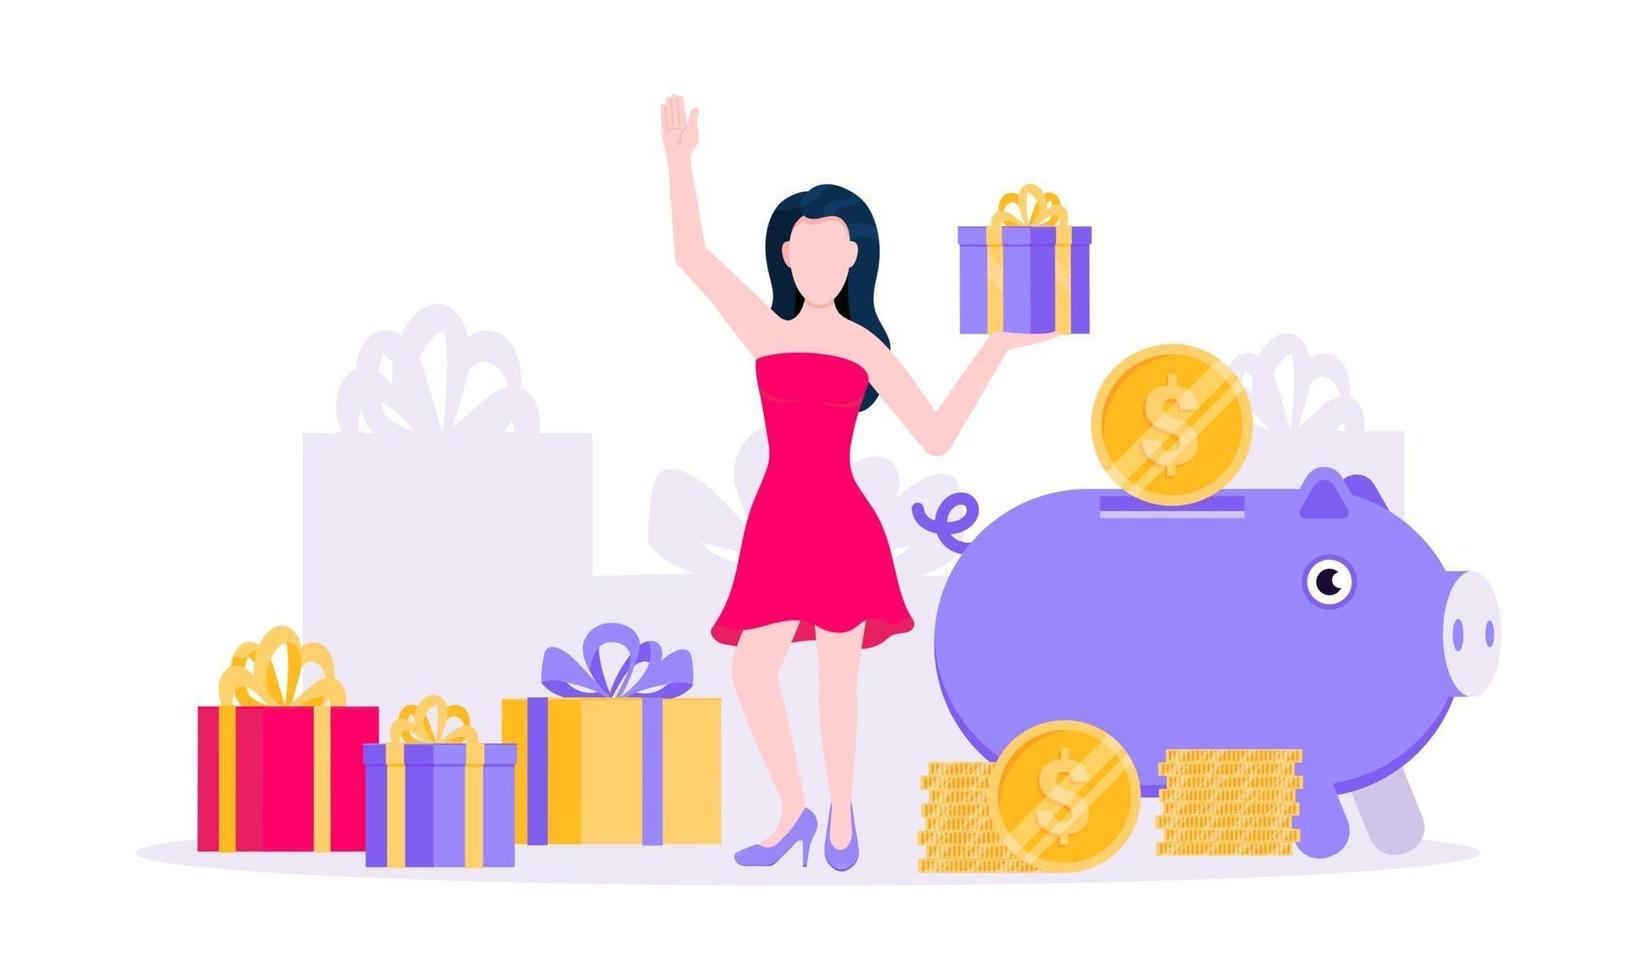 Earn points business concept flat style design vector illustration.